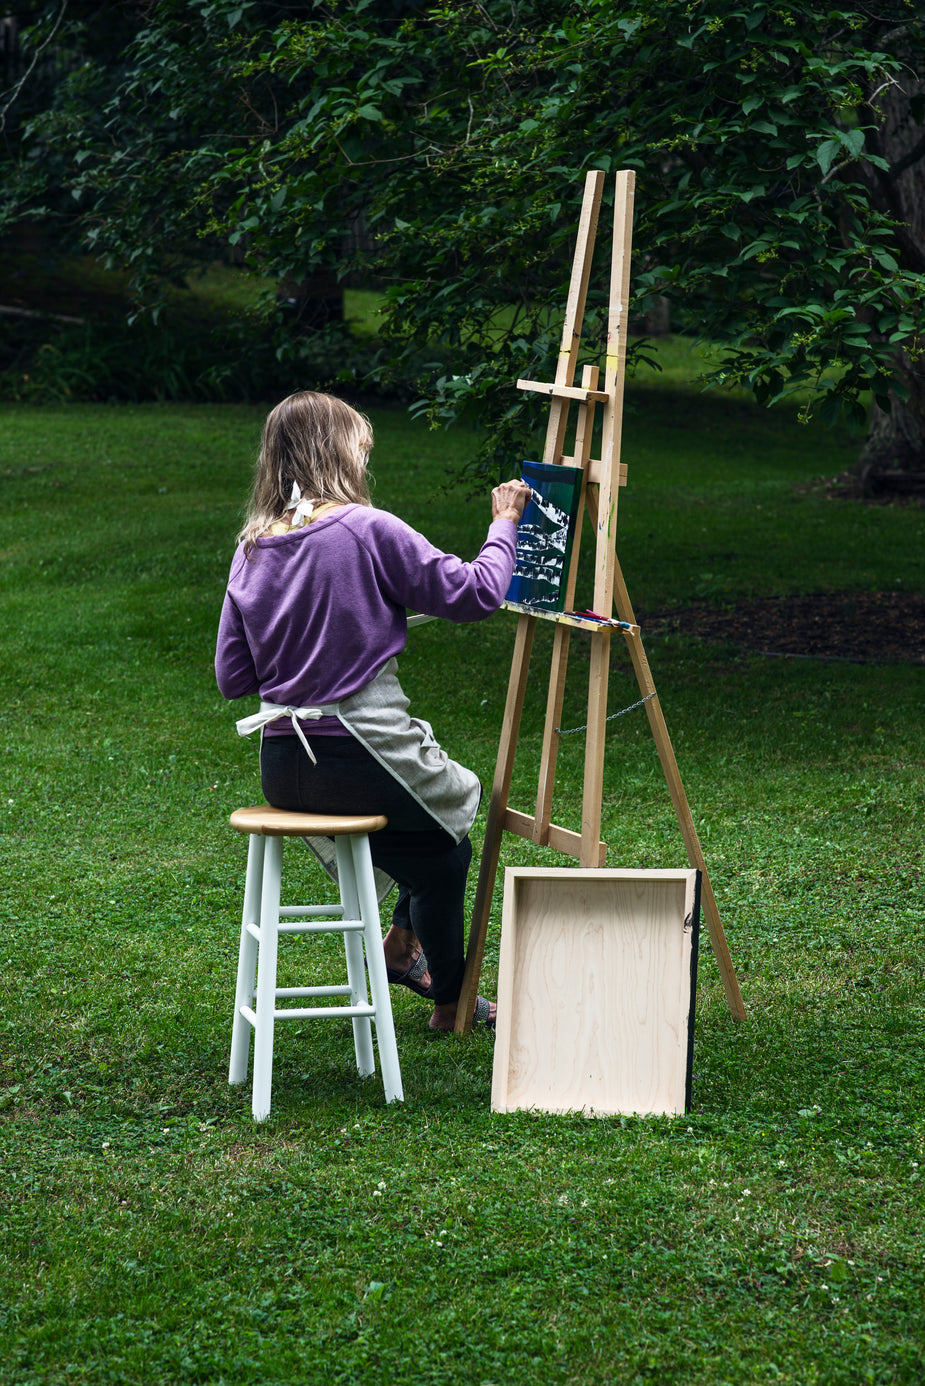 Small Easel On A White Background Stock Photo - Download Image Now